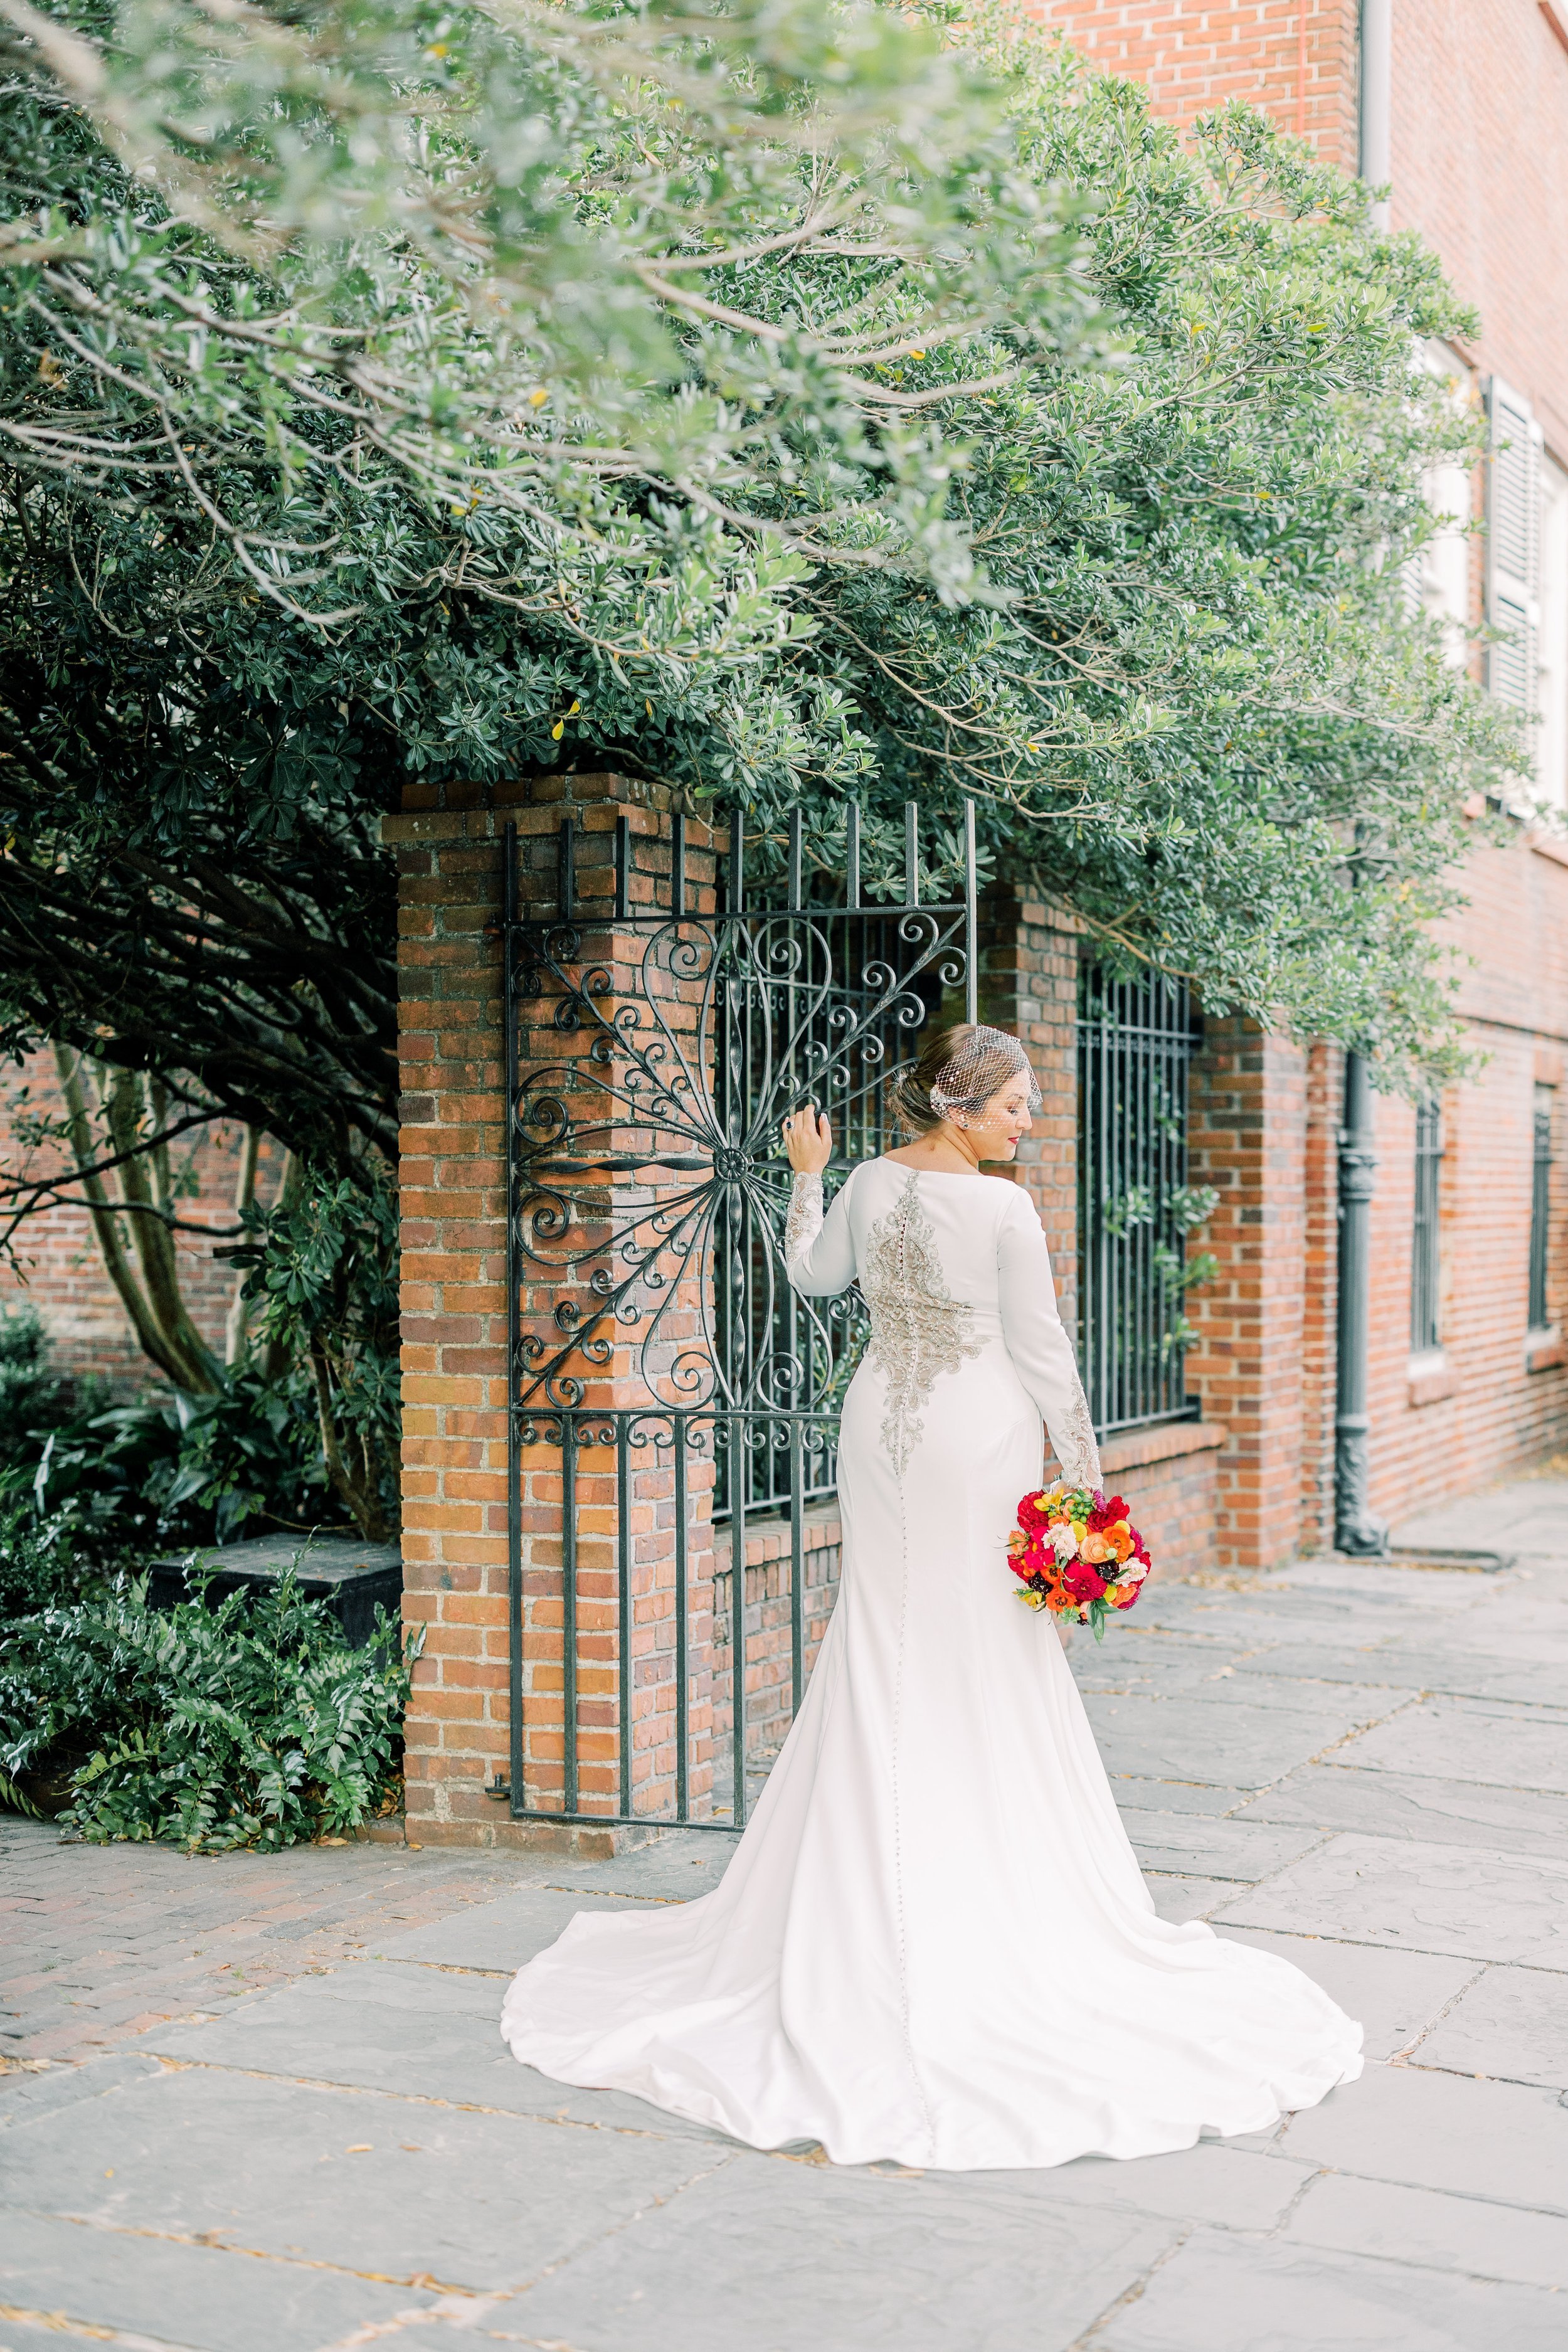 ivory-and-beau-blog-wedding-blog-real-bride-aston-by-sottero-and-midgley-maggie-sottero-wedding-dress-savannah-wedding-savannah-bride-savannah-bridal-shop-davenport-house-wedding-Rachel Linder Photography_Savannah Wedding Photographer-242.jpg